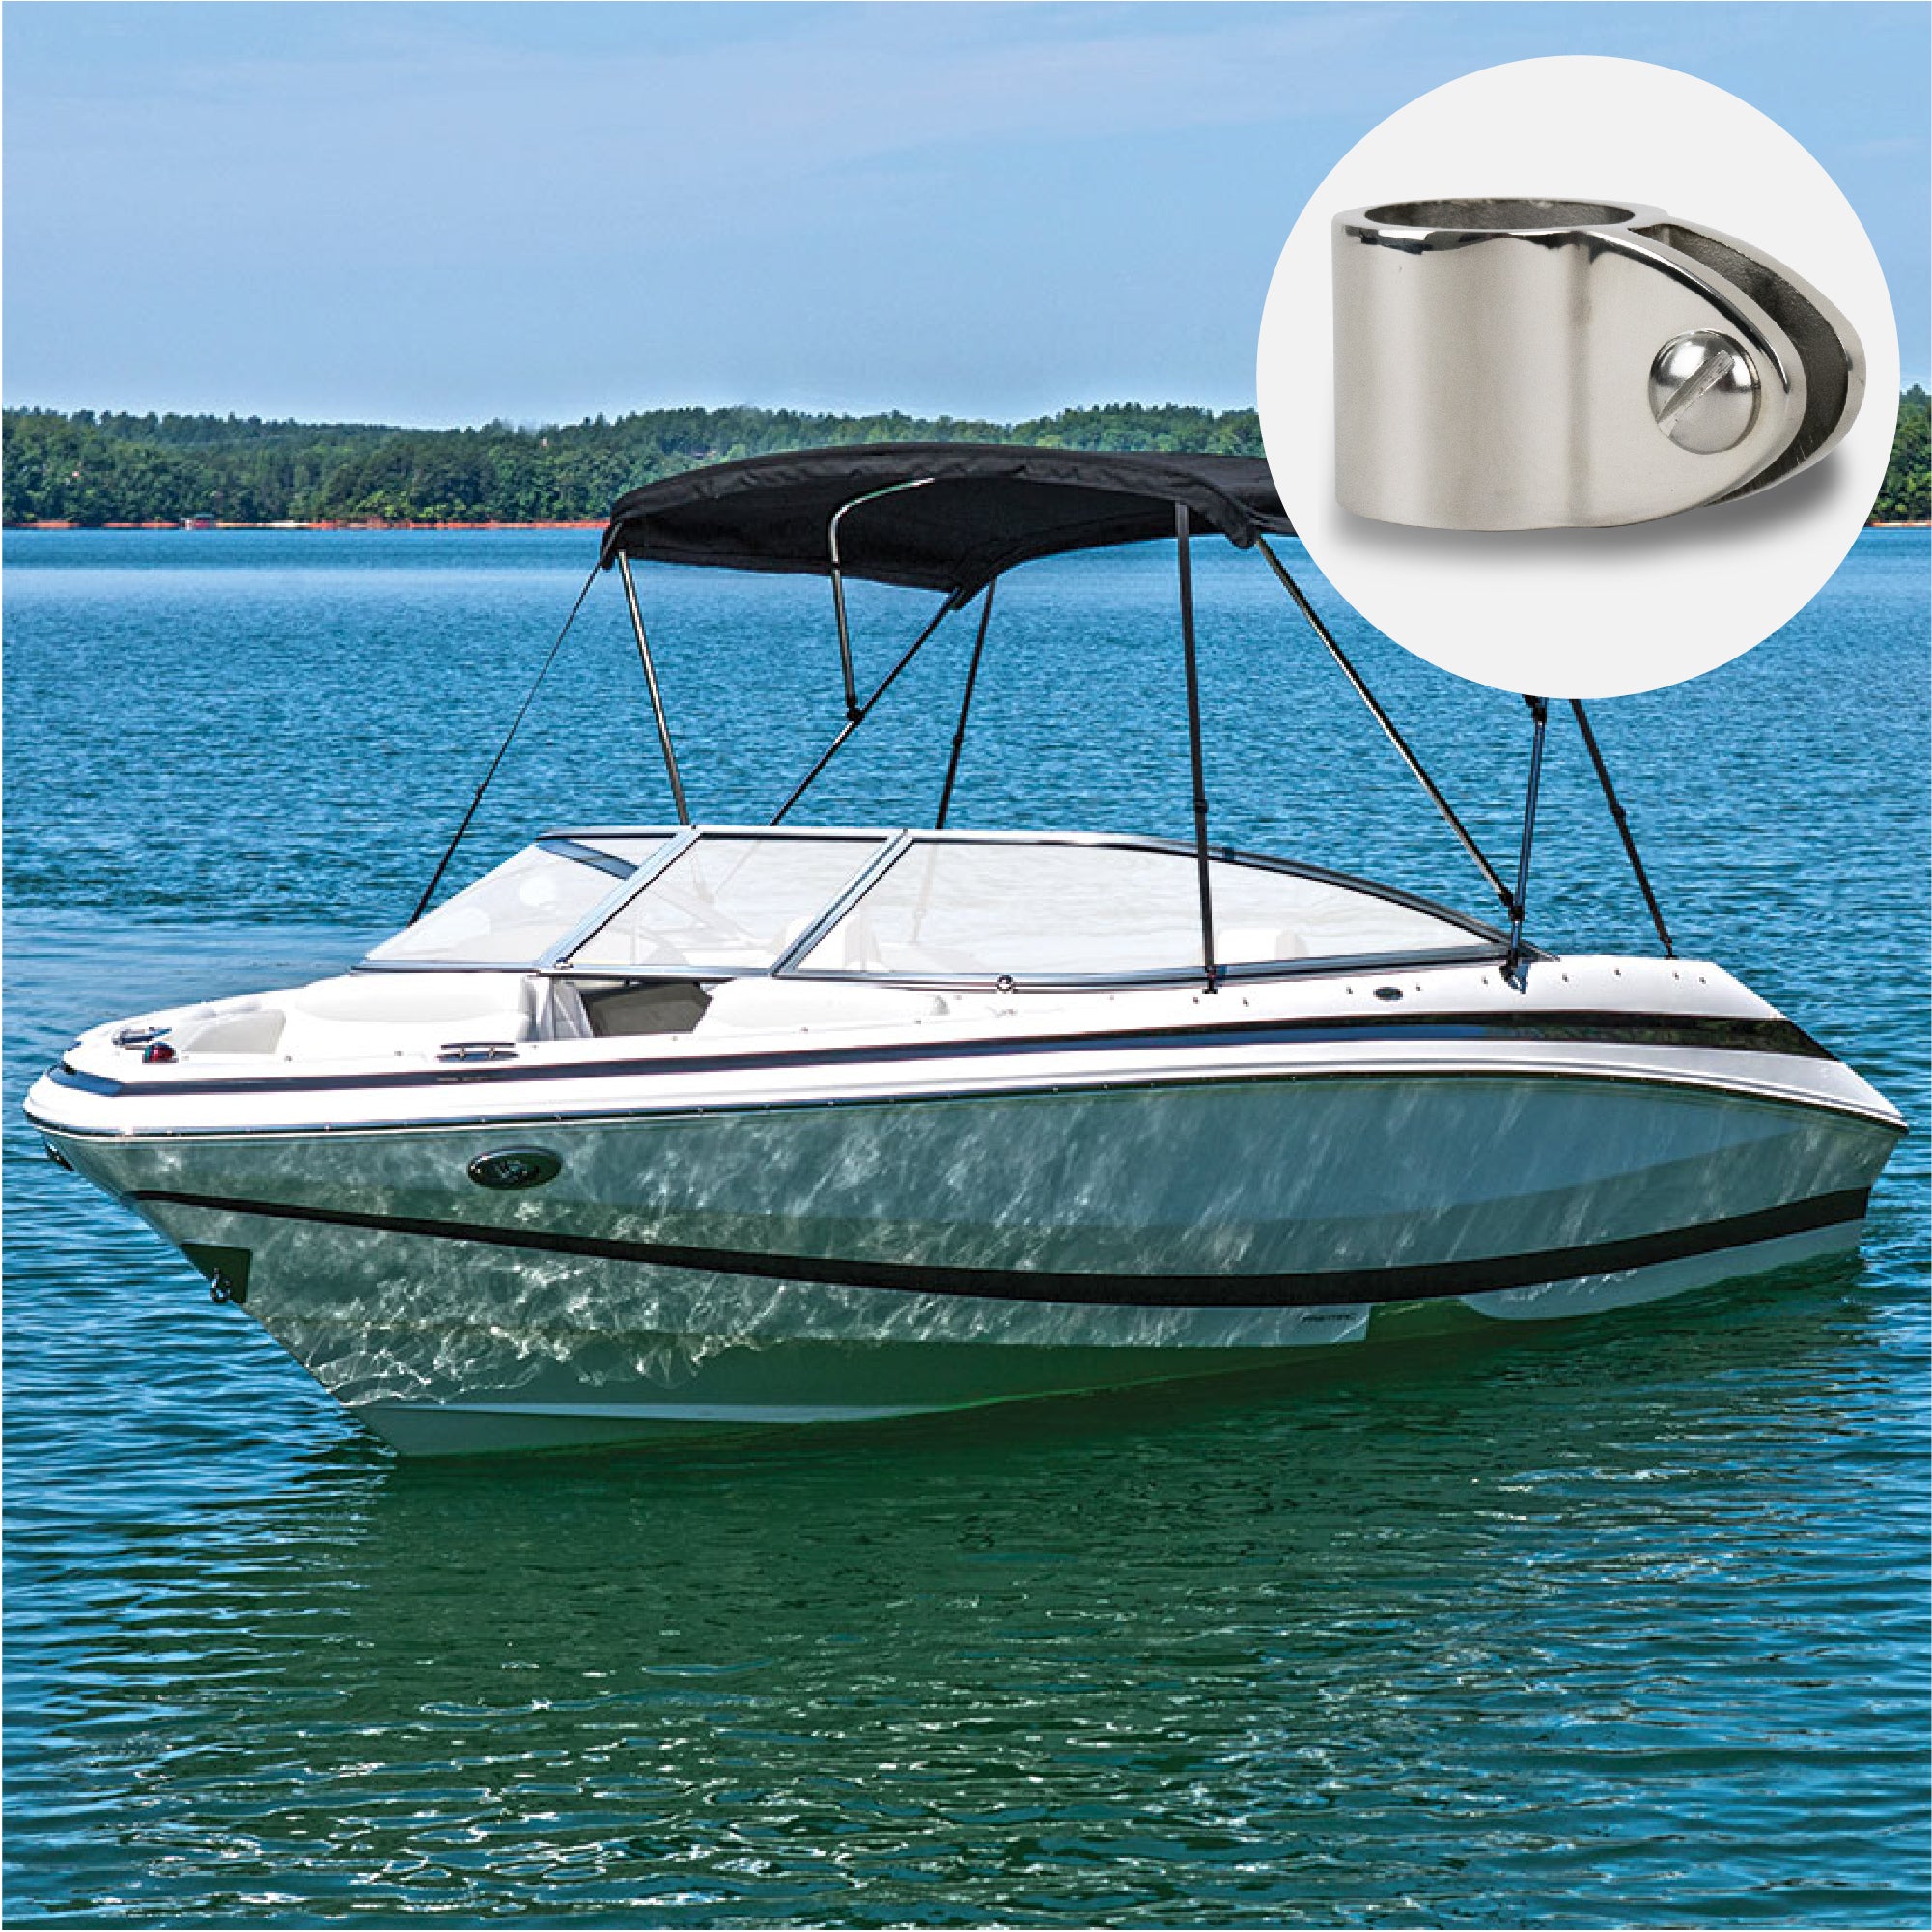 Bimini Top Jaw Slide, 7/8" AISI316 Stainless Steel, 2-Pack - FO369-M2